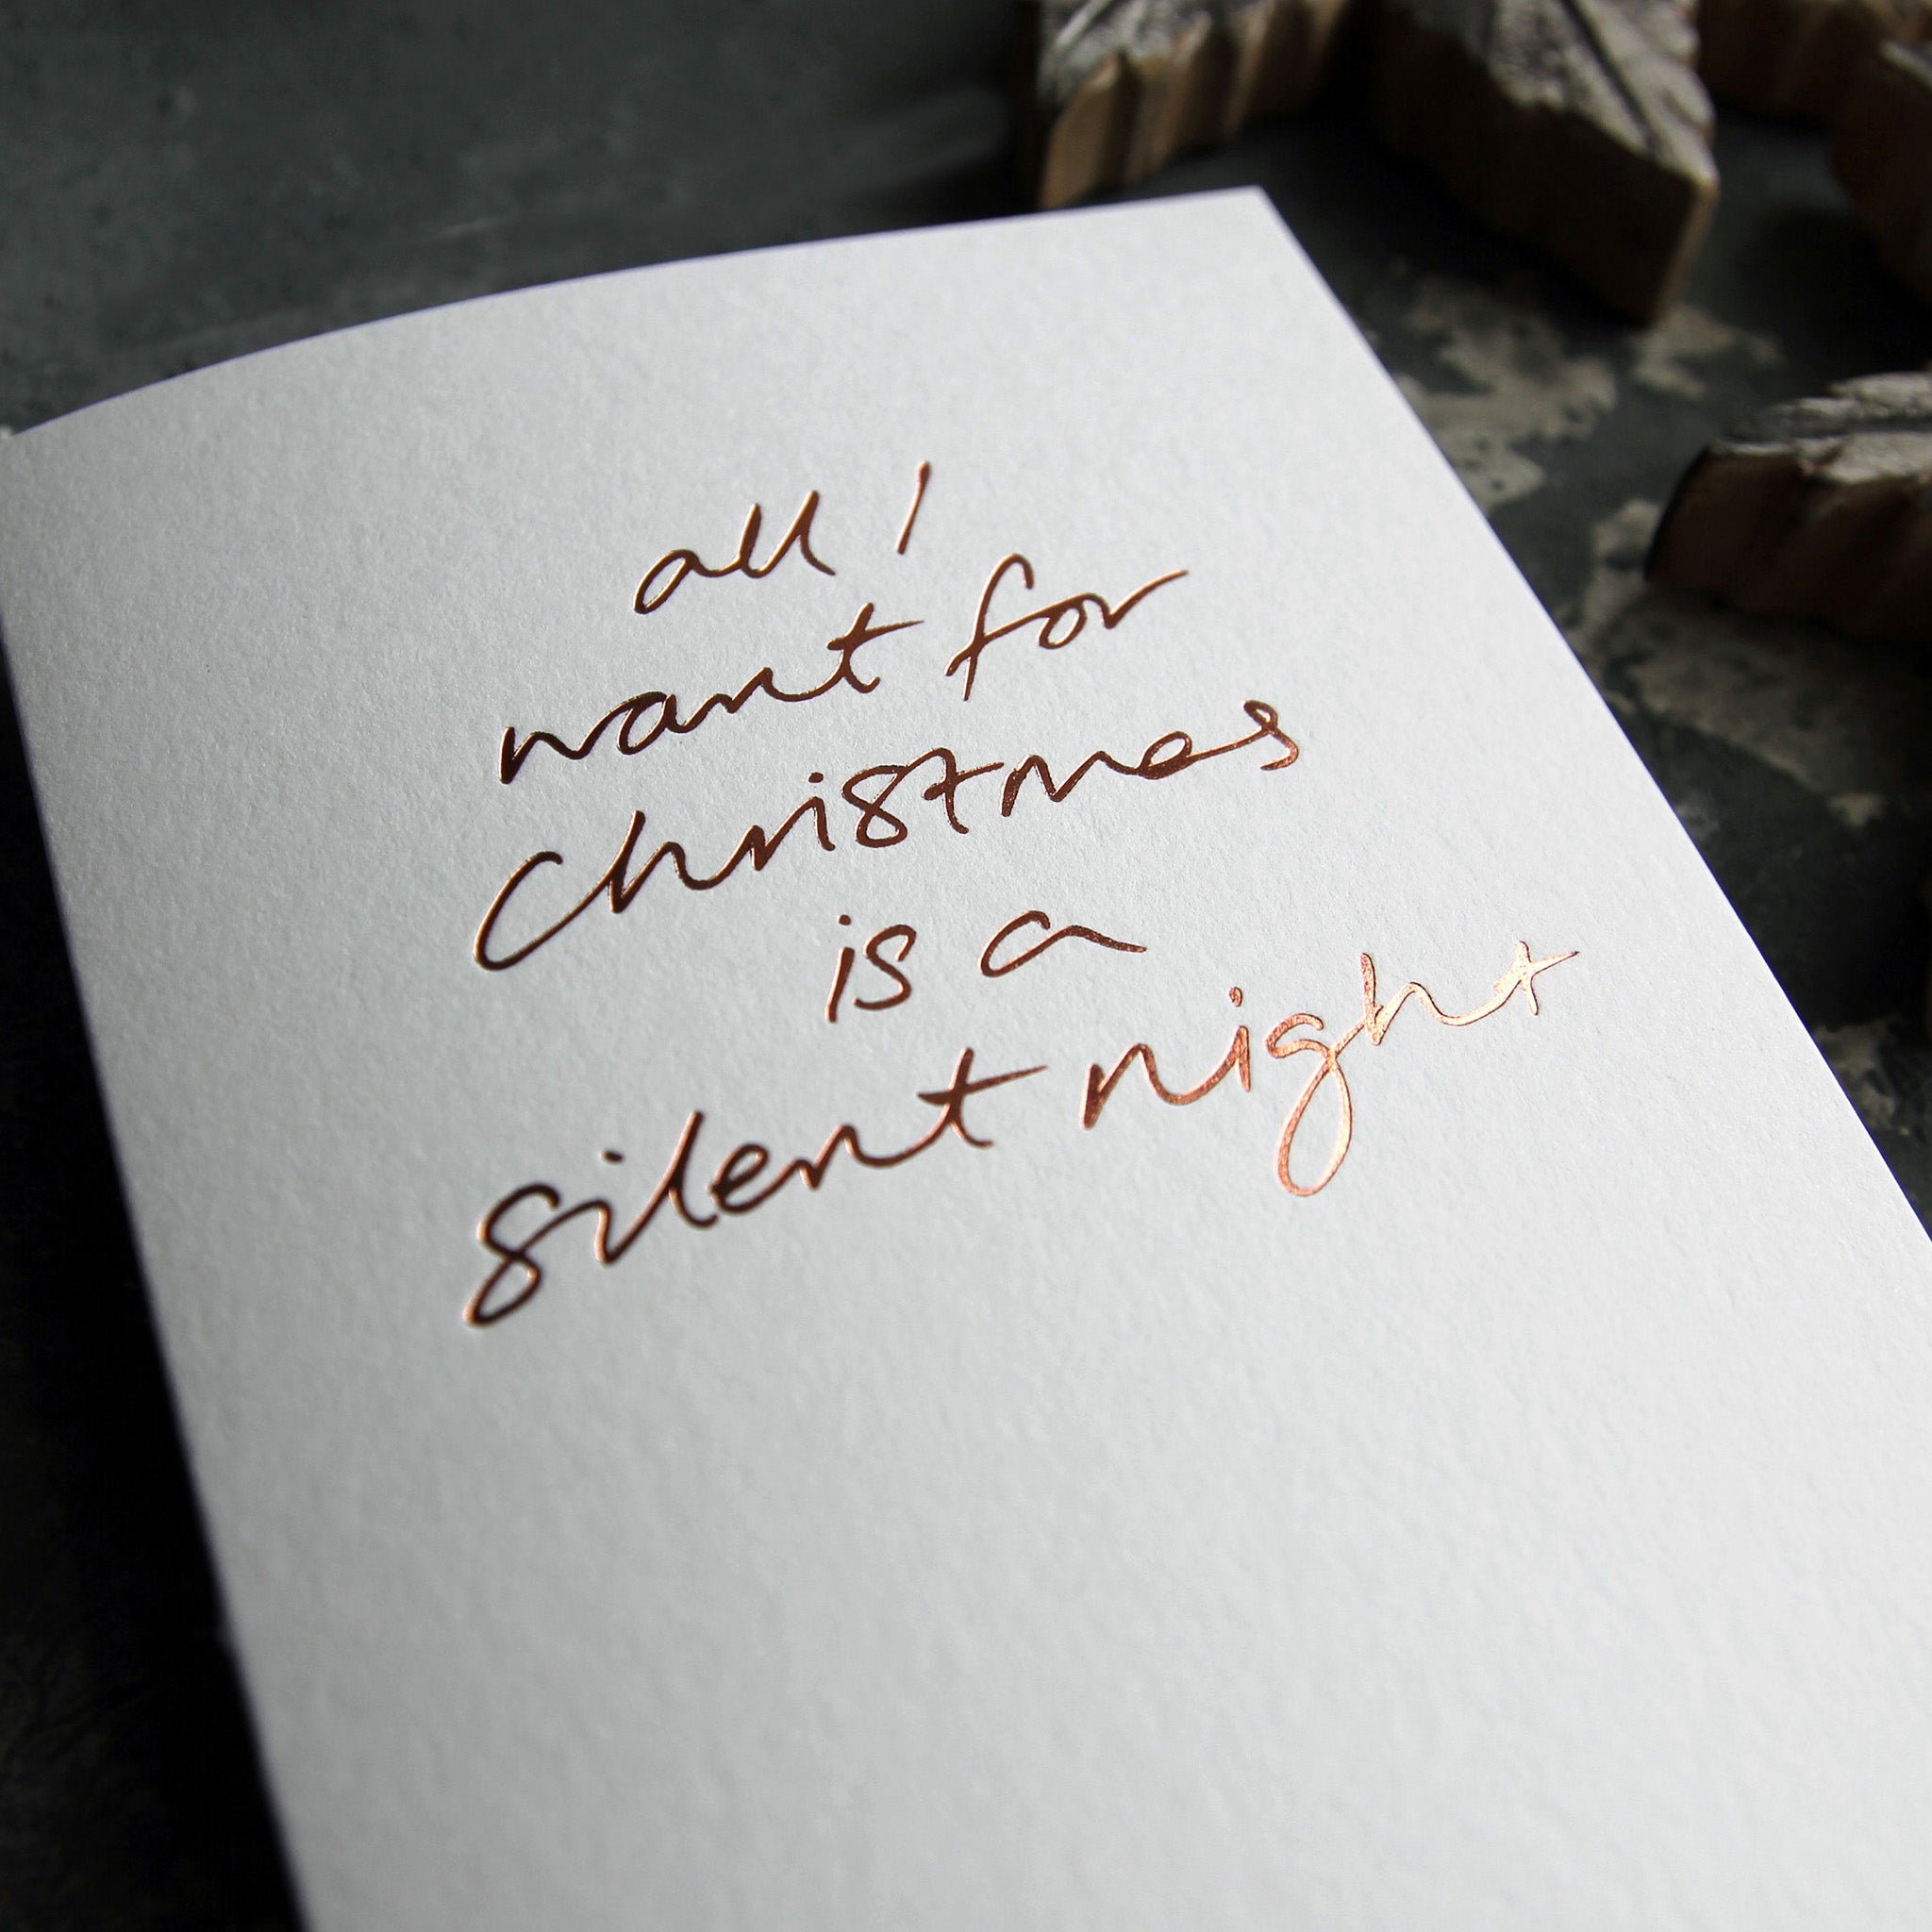 All I Want For Christmas Is A Silent Night